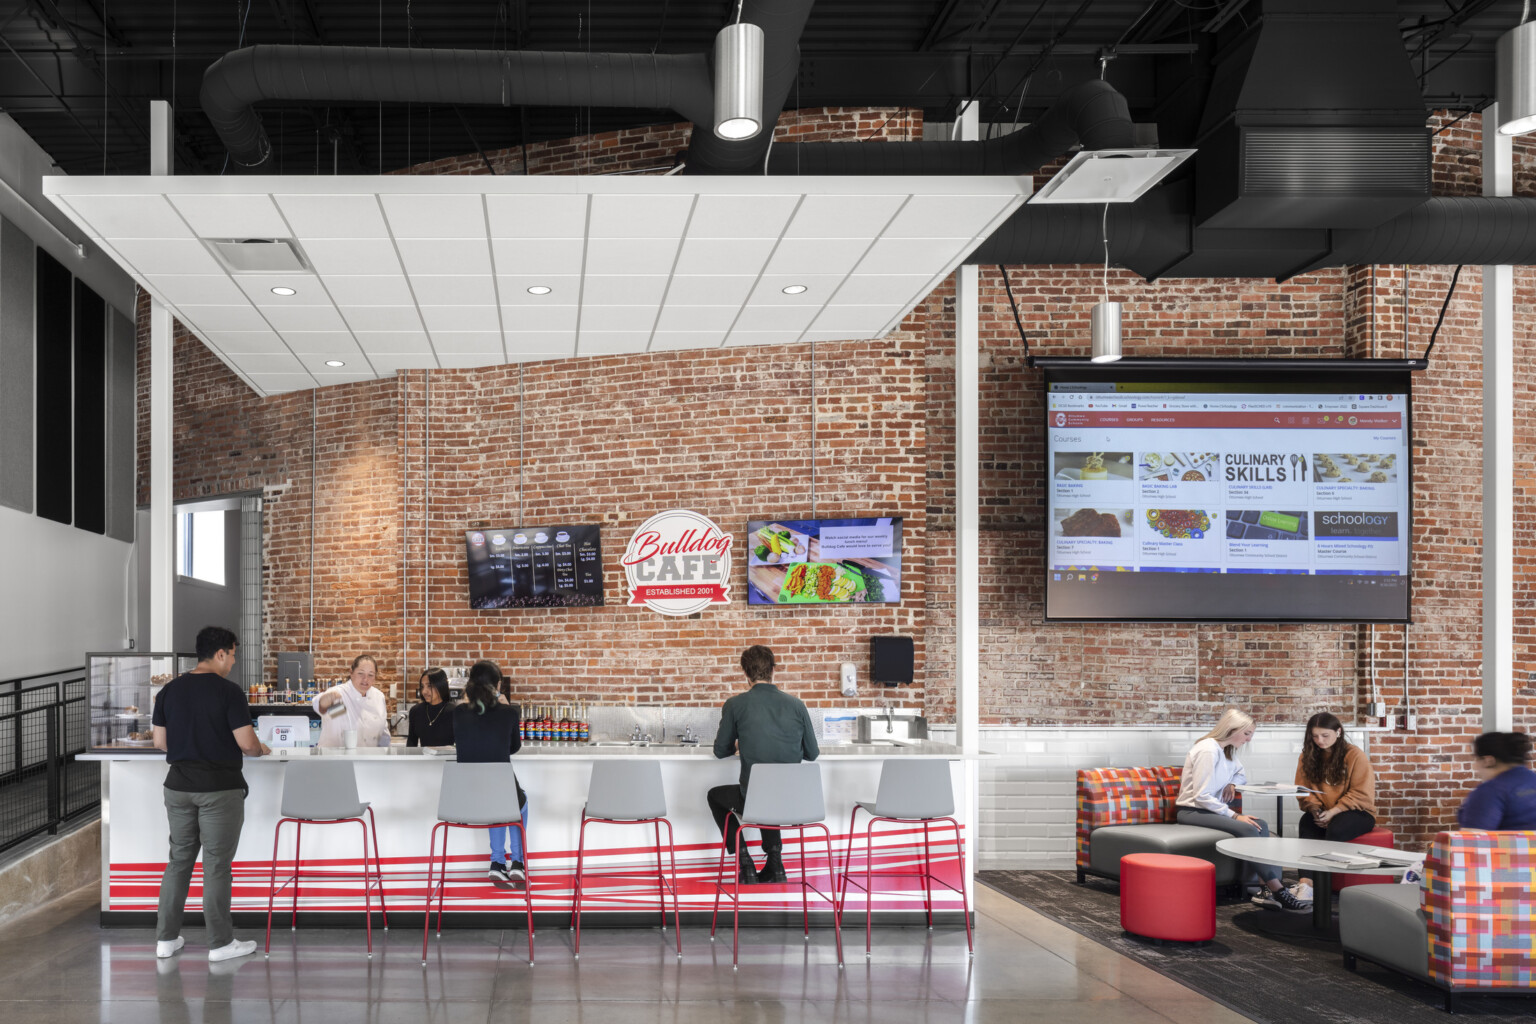 students dine in Bulldog Cafe, exposed brick walls, high-ceilings, exposed ductwork, counter and booth seating, large video screen menu display, polished concrete flooring, signage